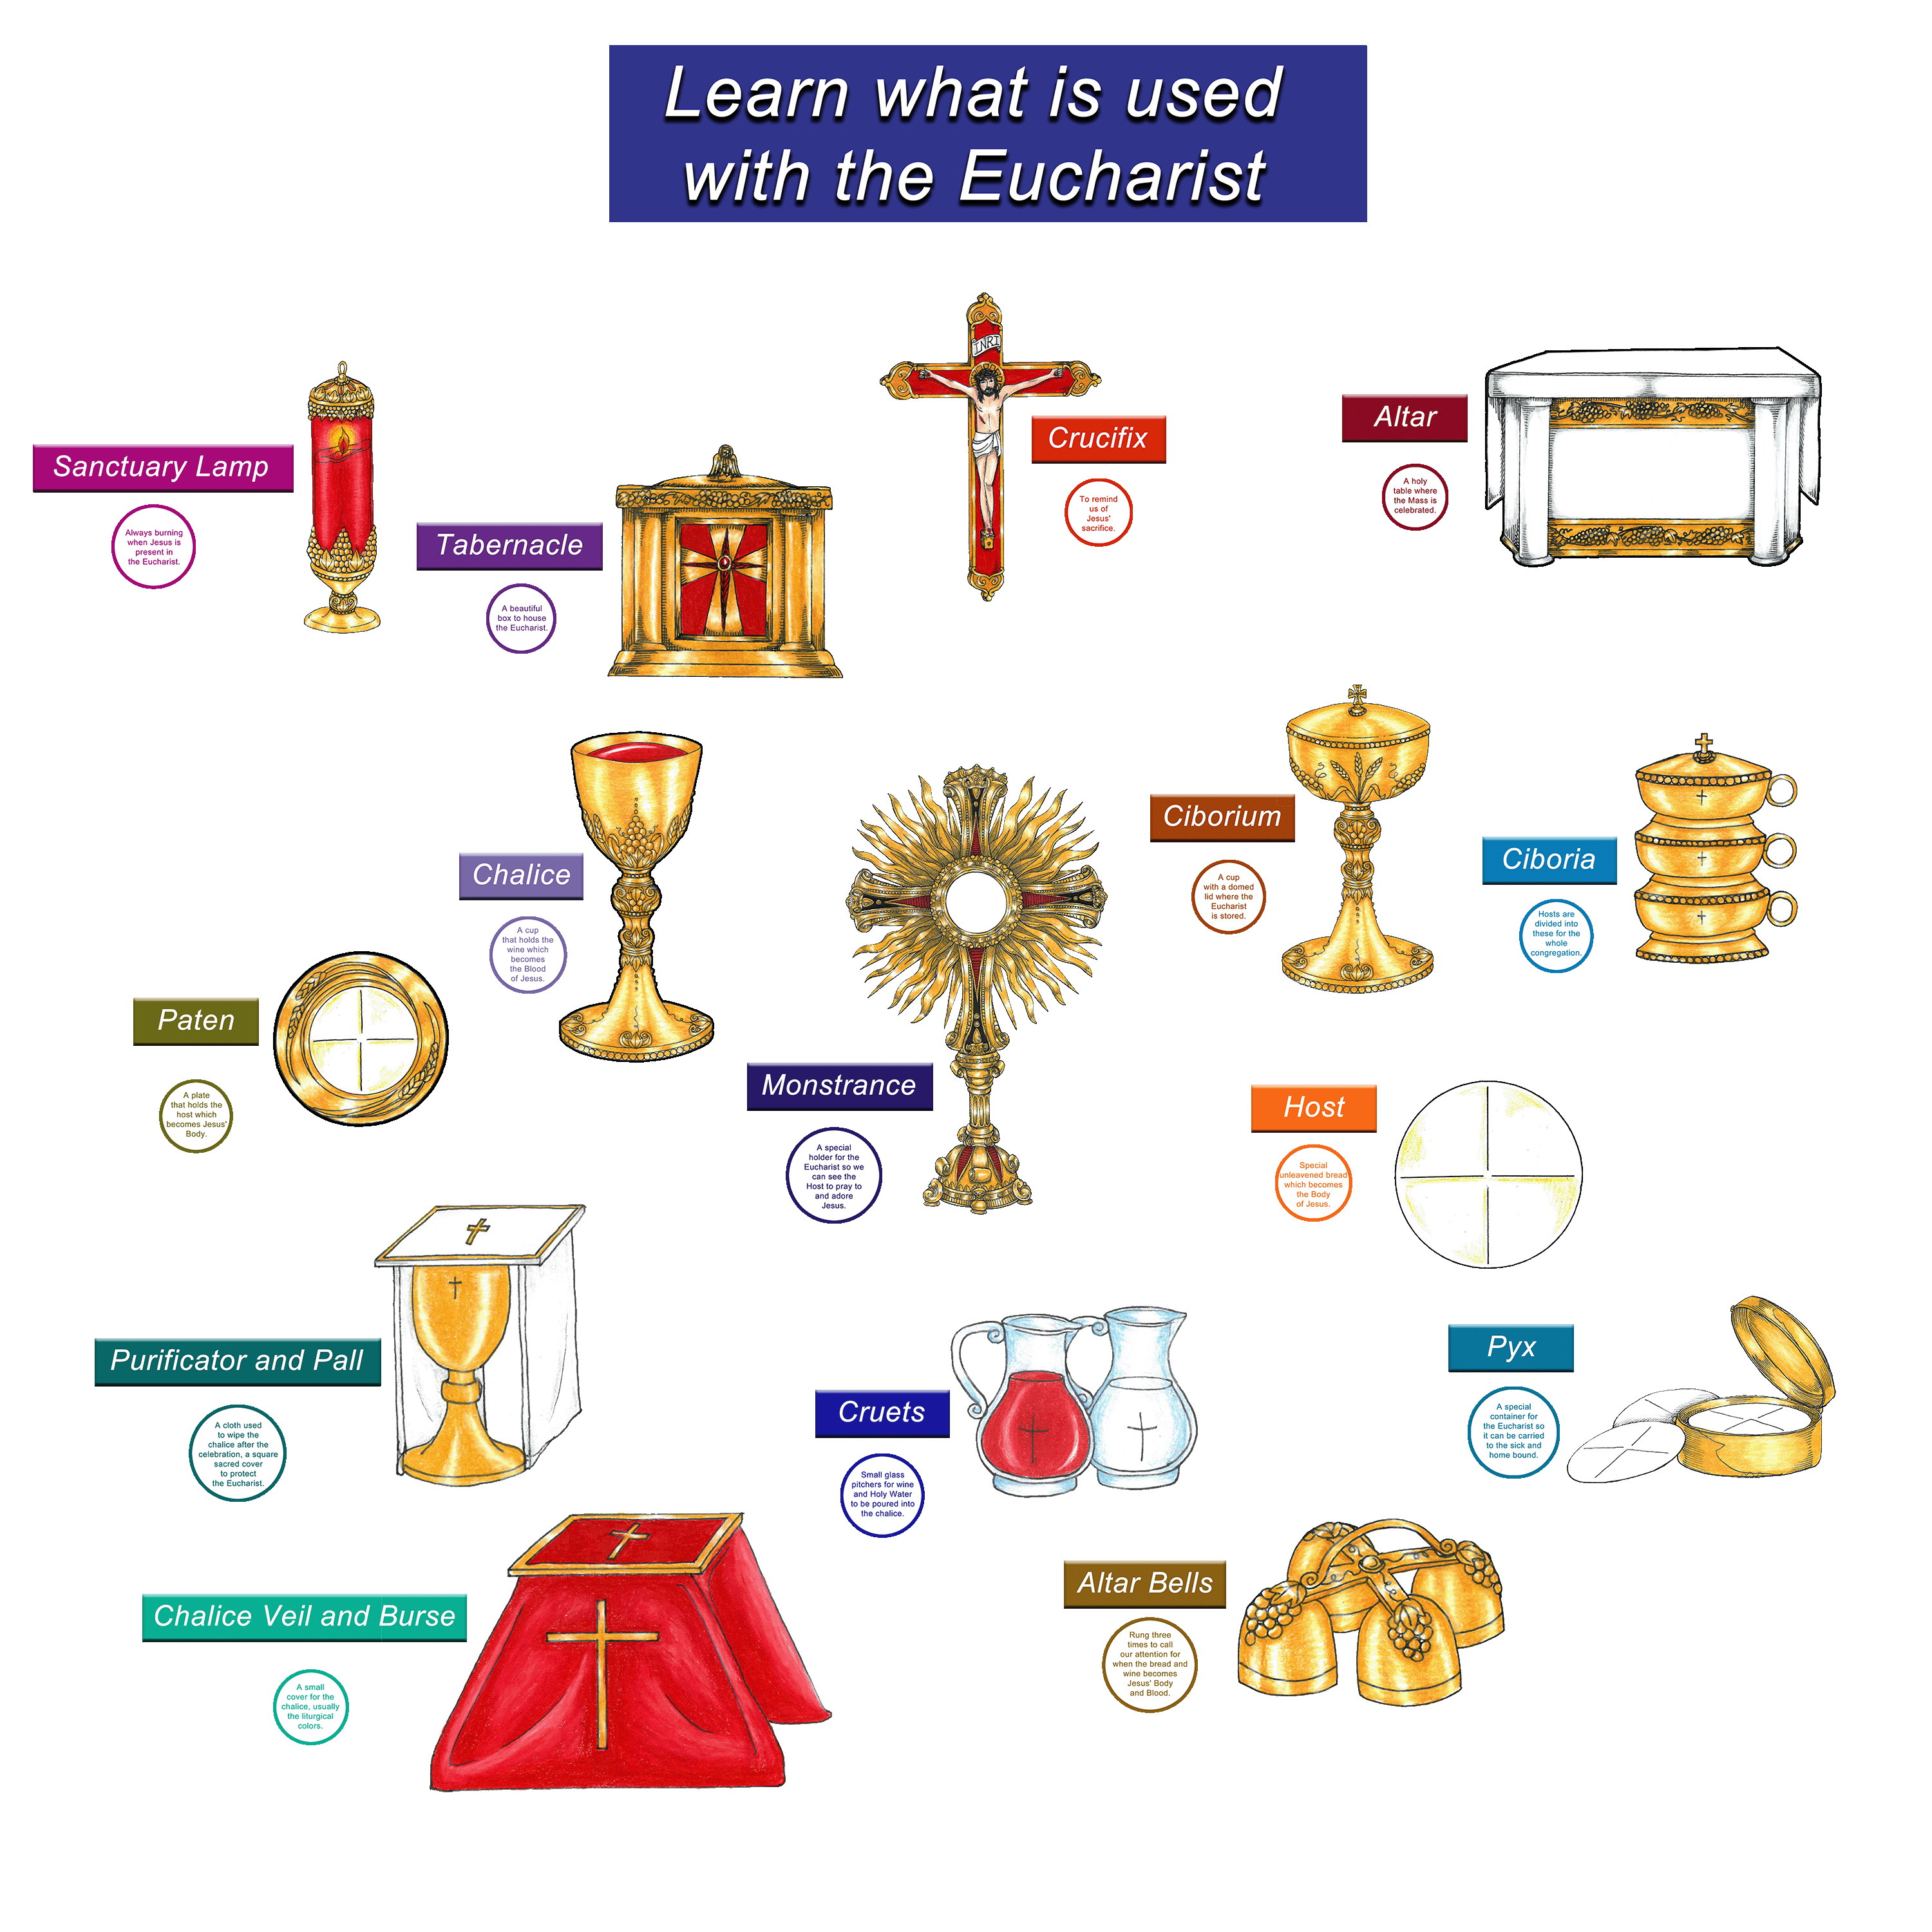 Learn what is used with the Eucharist